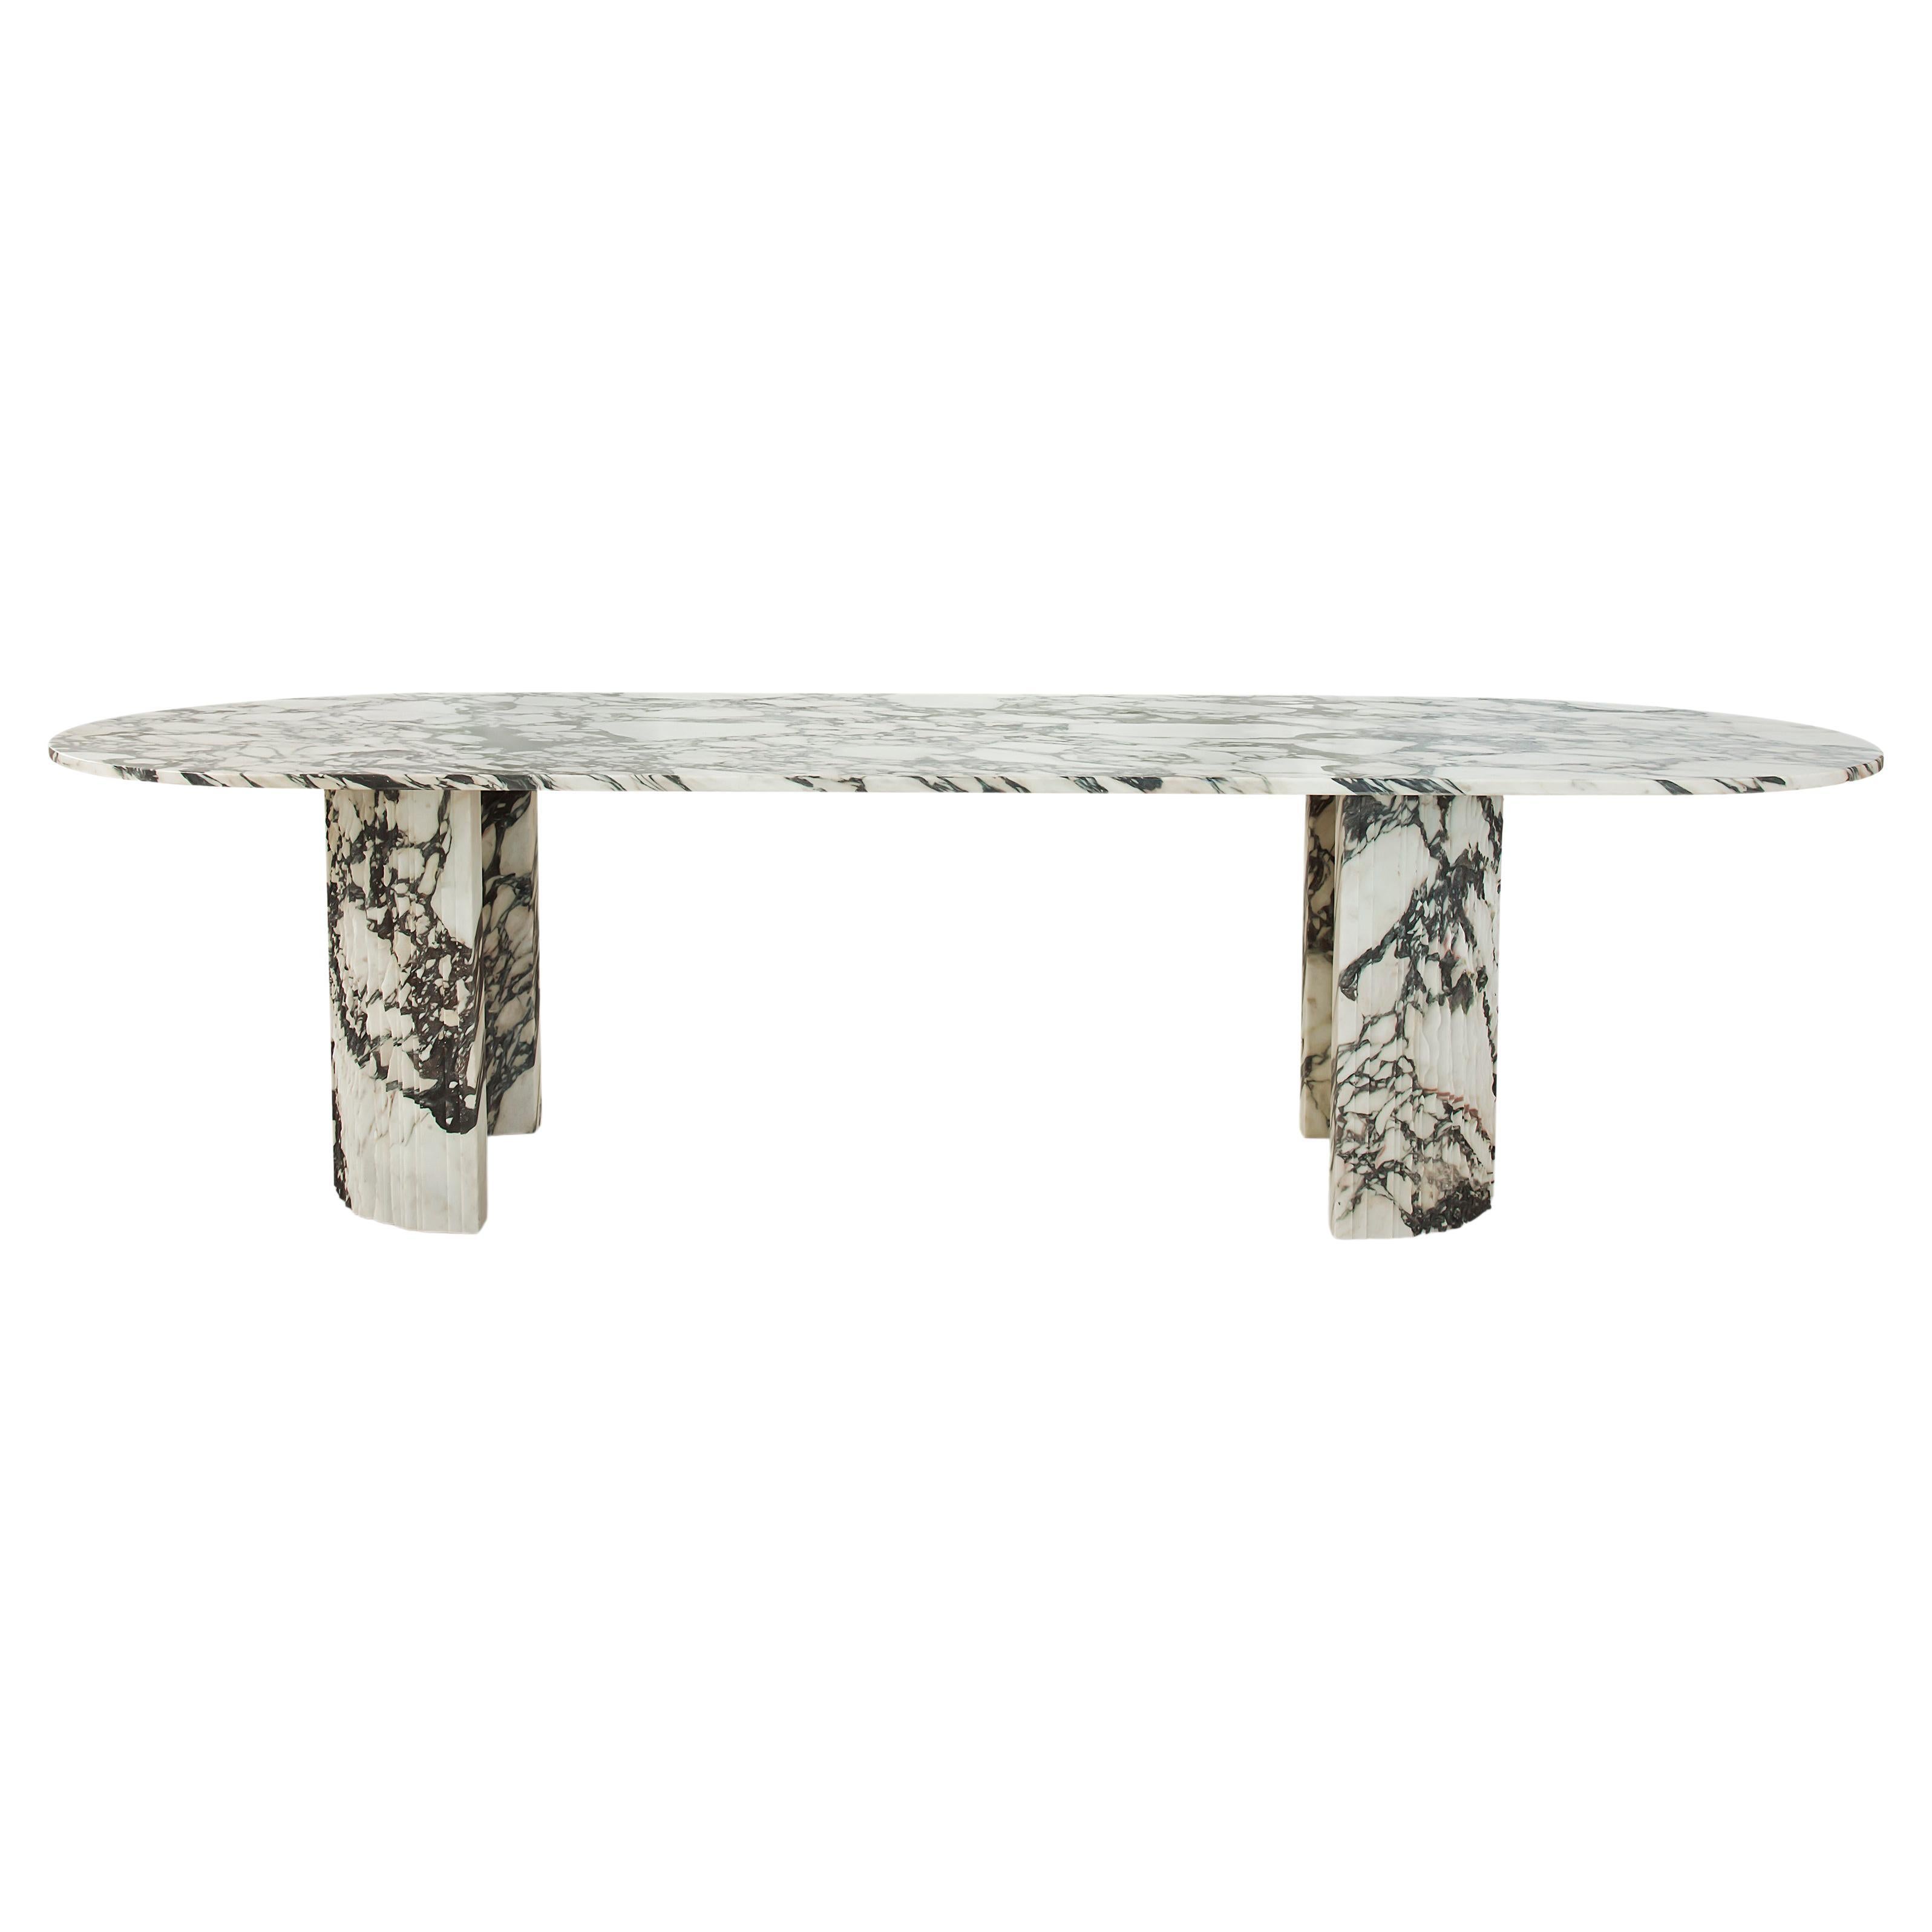 Sculpted Brescia Marble Table by Omar Chakil - Private listing for L.